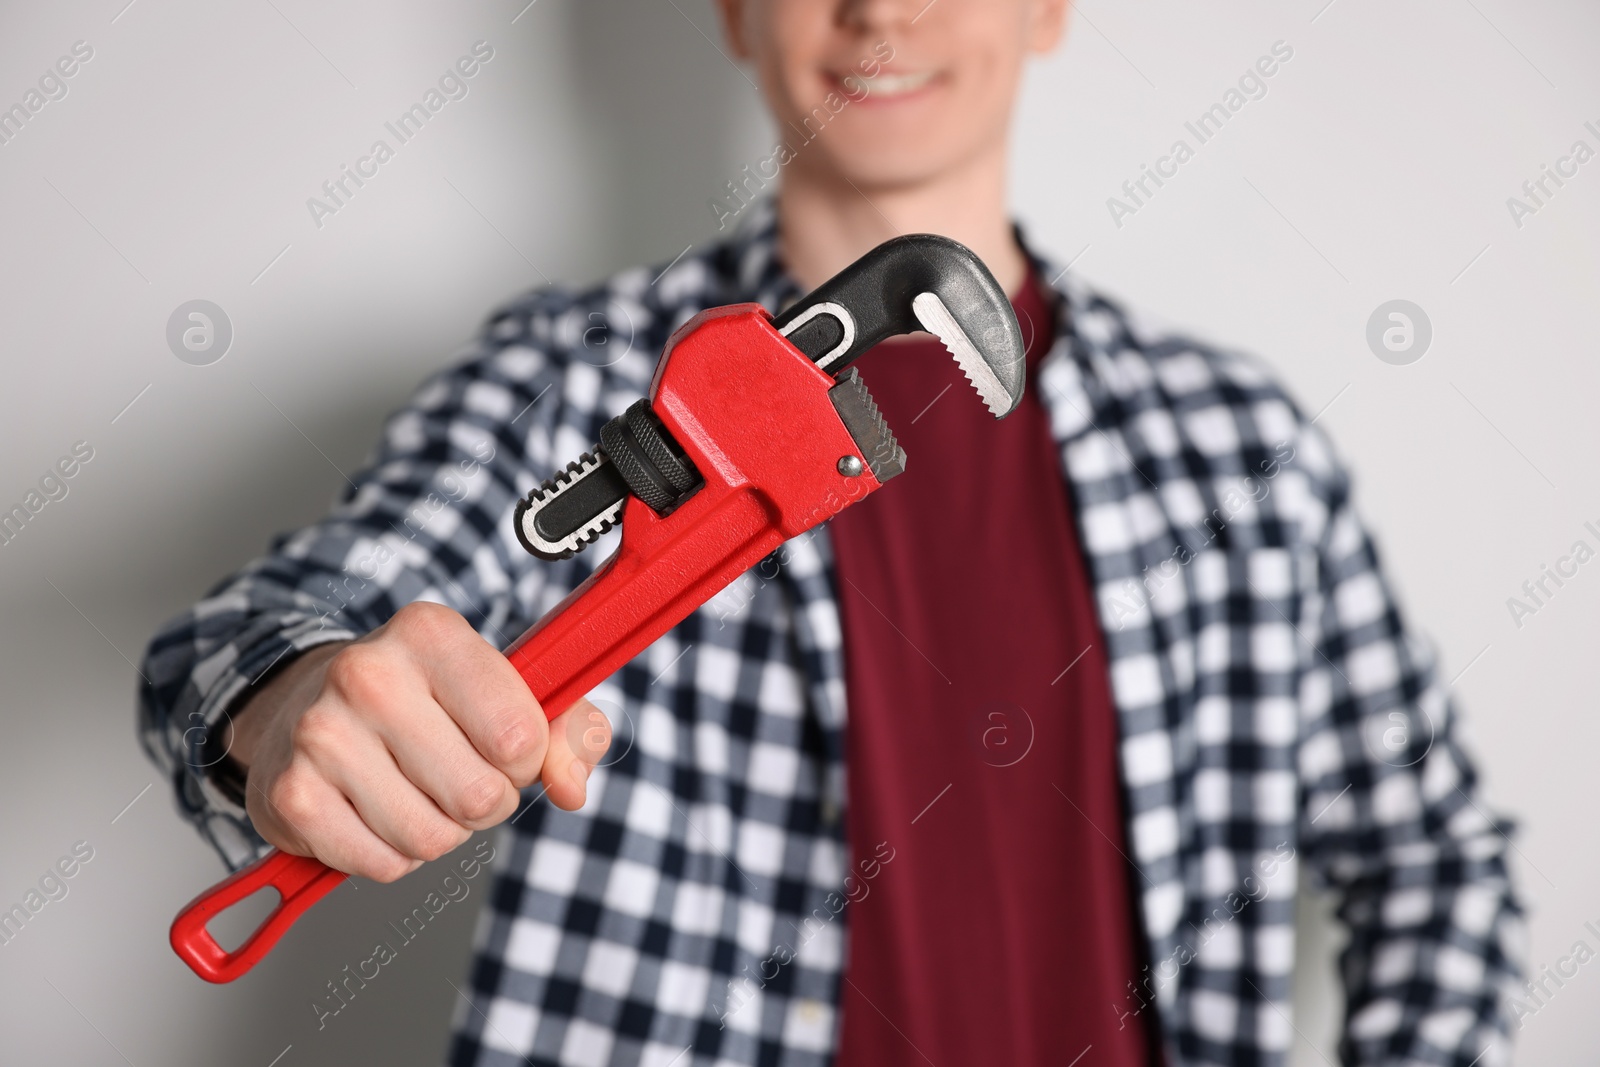 Photo of Handyman with pipe wrench against light background, focus on hand